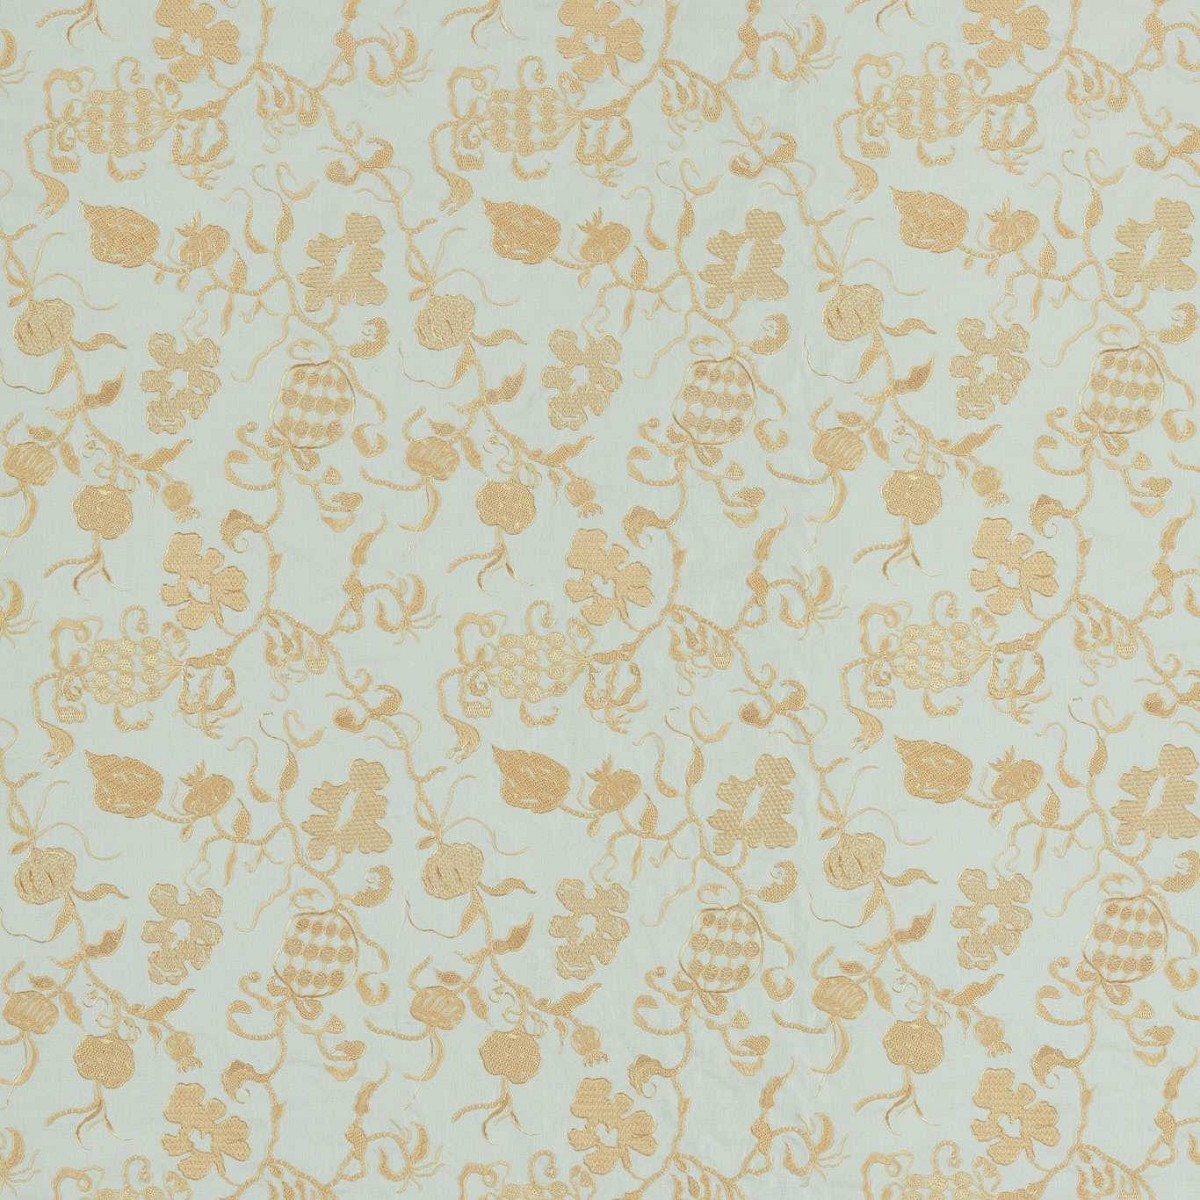 Mydsommer Pickings Smog Blue/Lame Gold Fabric by Sanderson